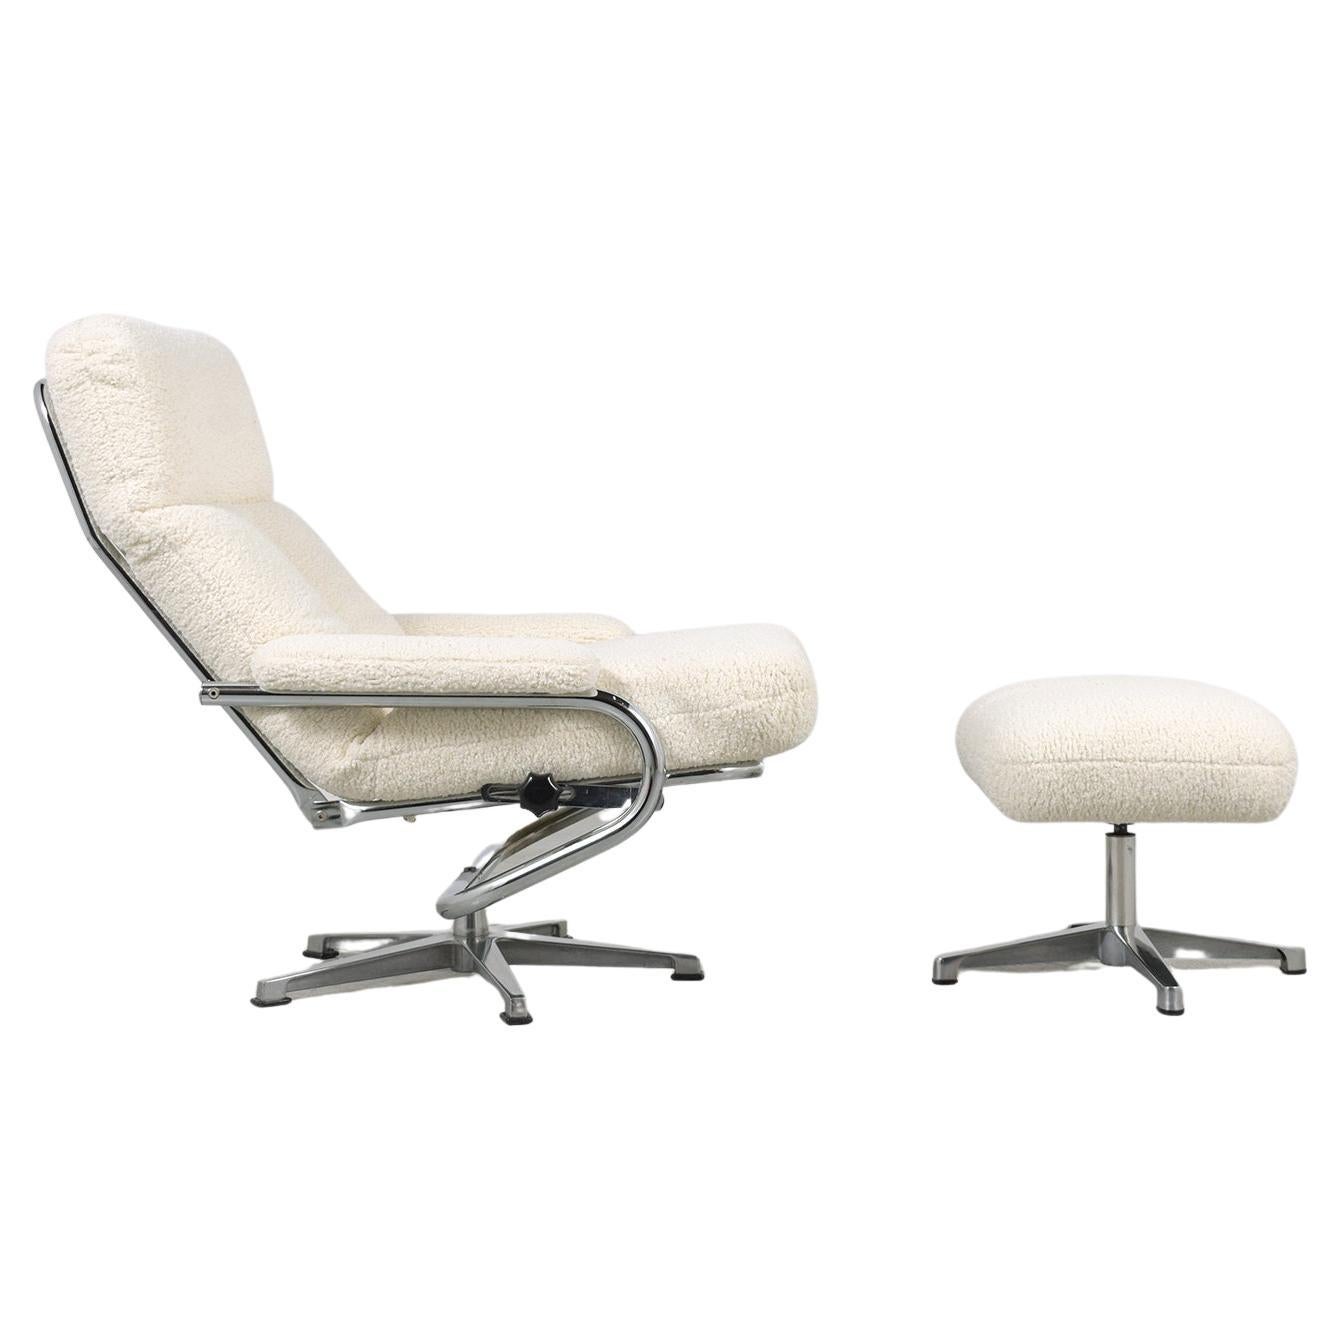 Late 20th Century Mid-Century Modern Swivel Lounge Chair and Ottoman 